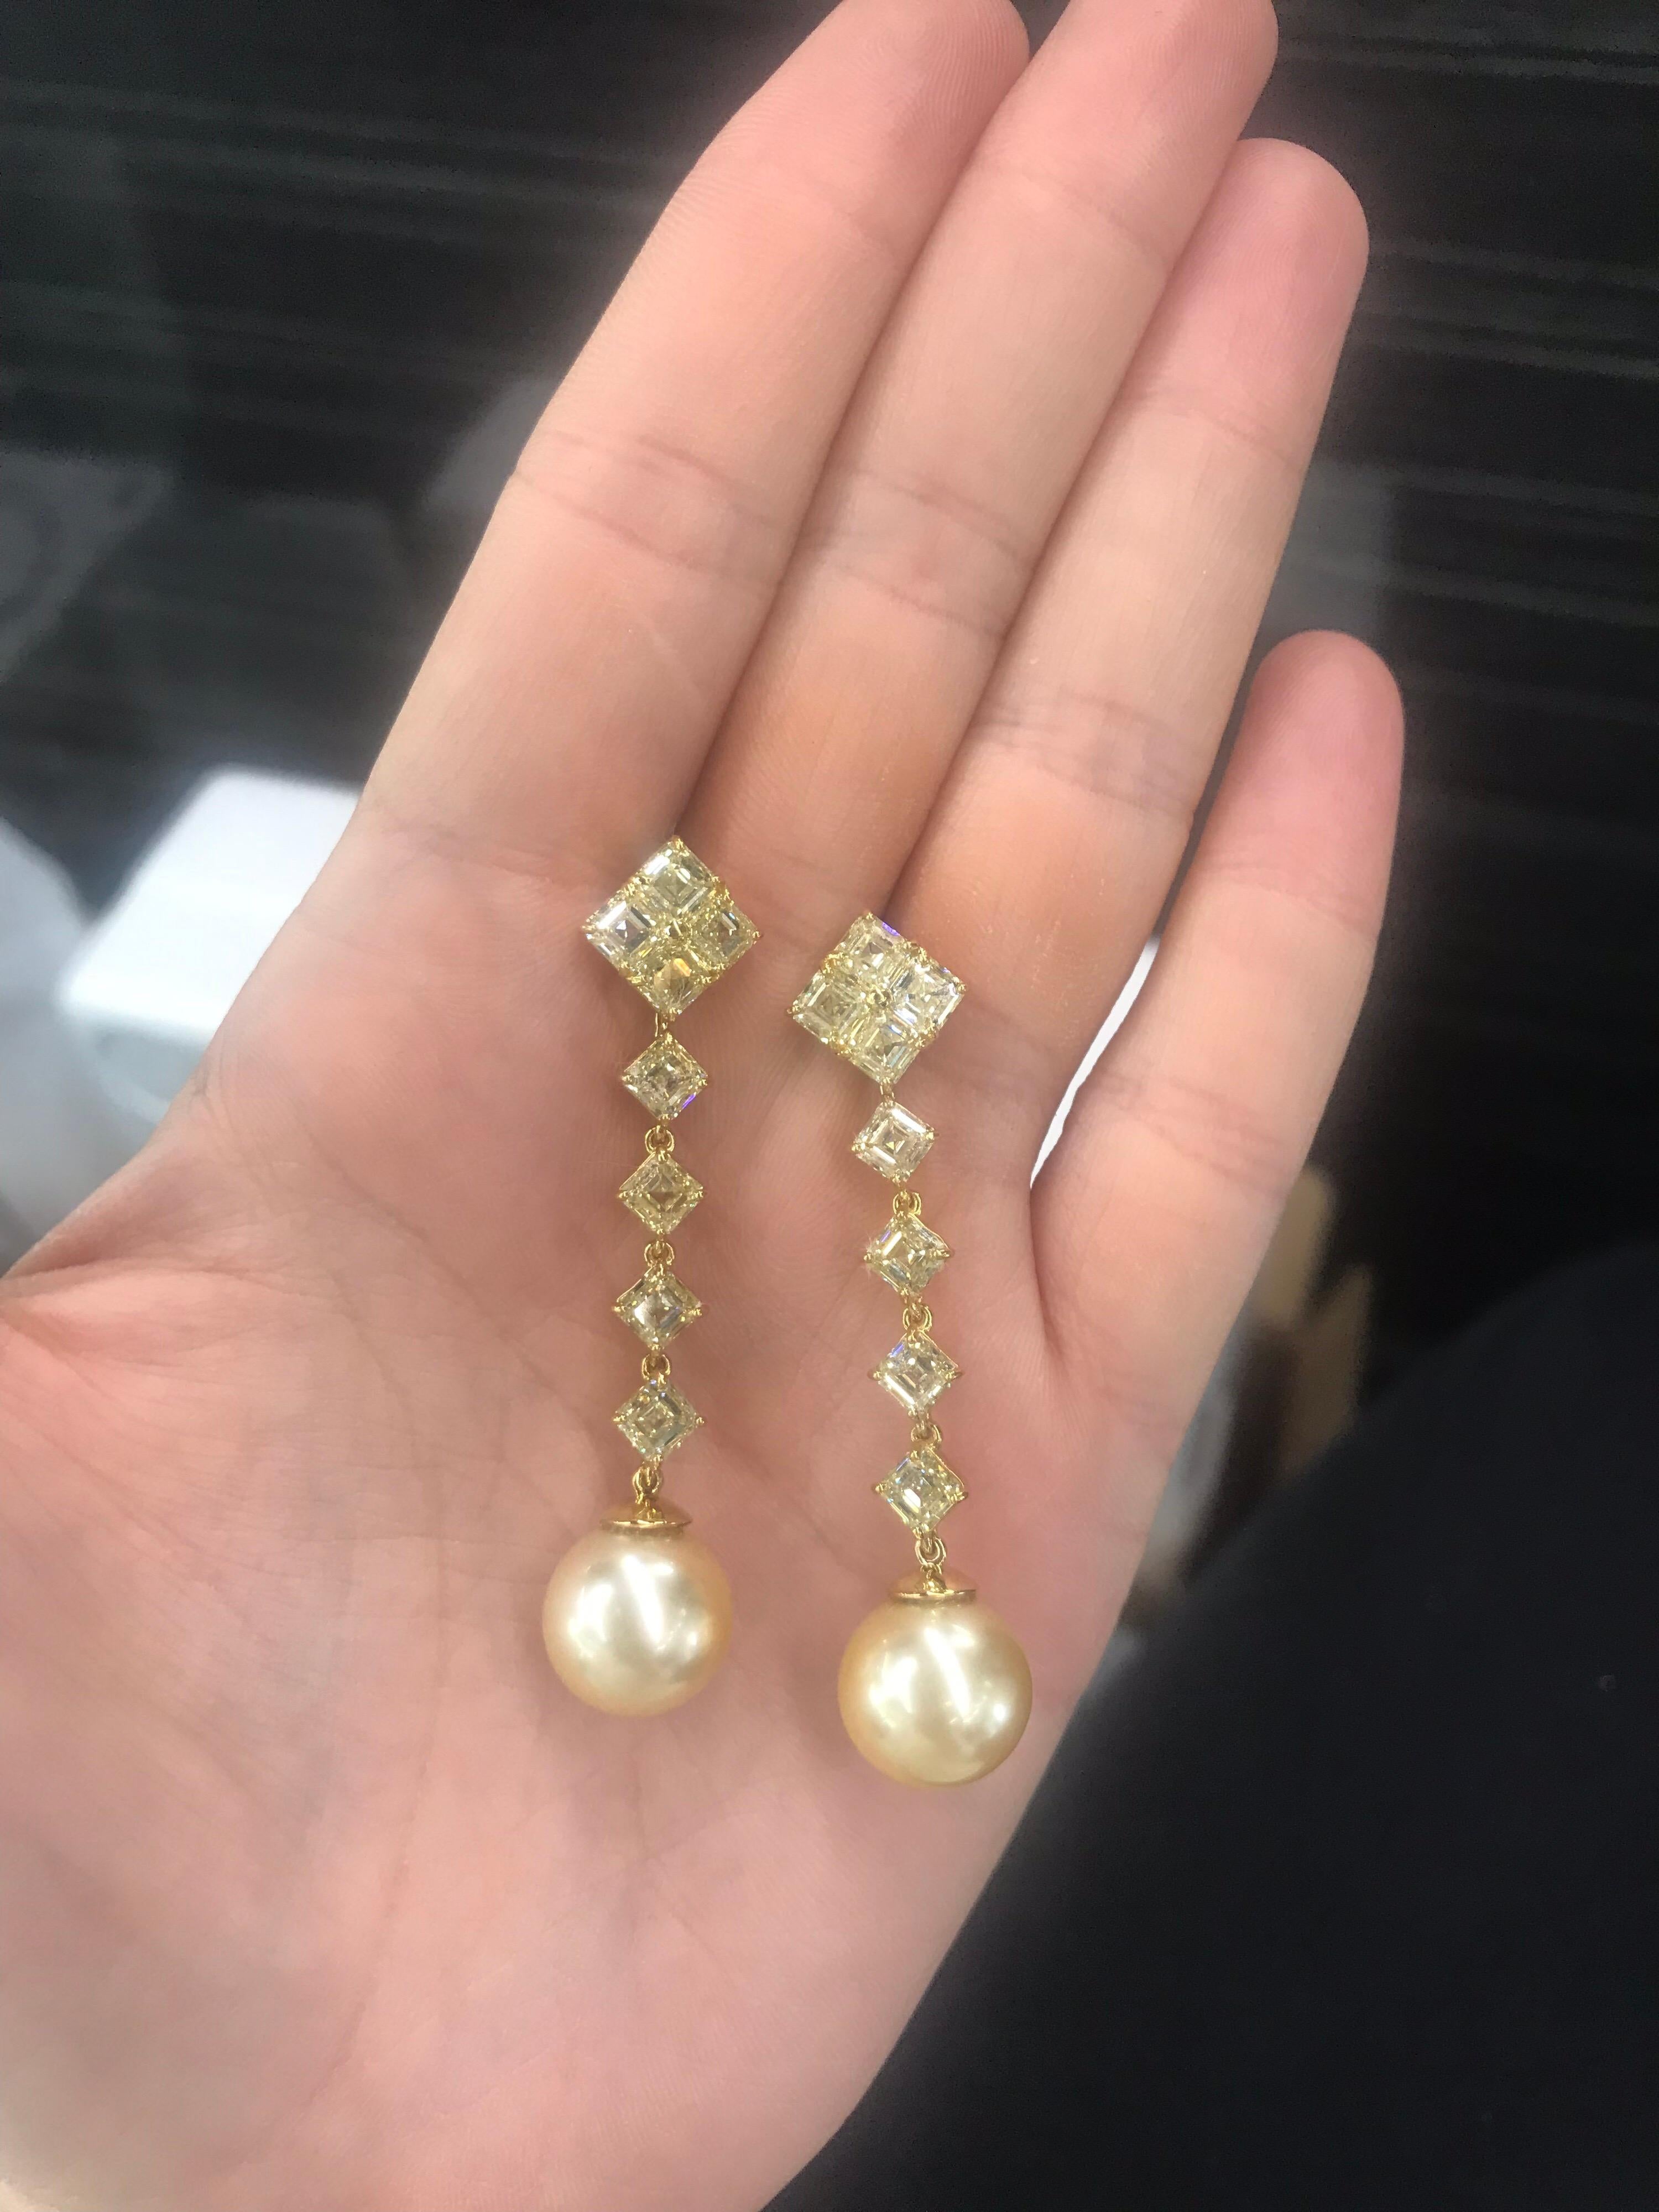 Day & Night, 22K Yellow Gold earrings featuring 16 Asscher cut Fancy Light Yellow diamonds weighing 9.01 Carats, VVS2-VS1, with two golden South Sea pearls.

Top of the earring can be worn as a stud. 
Much more impressive in person. A beautiful